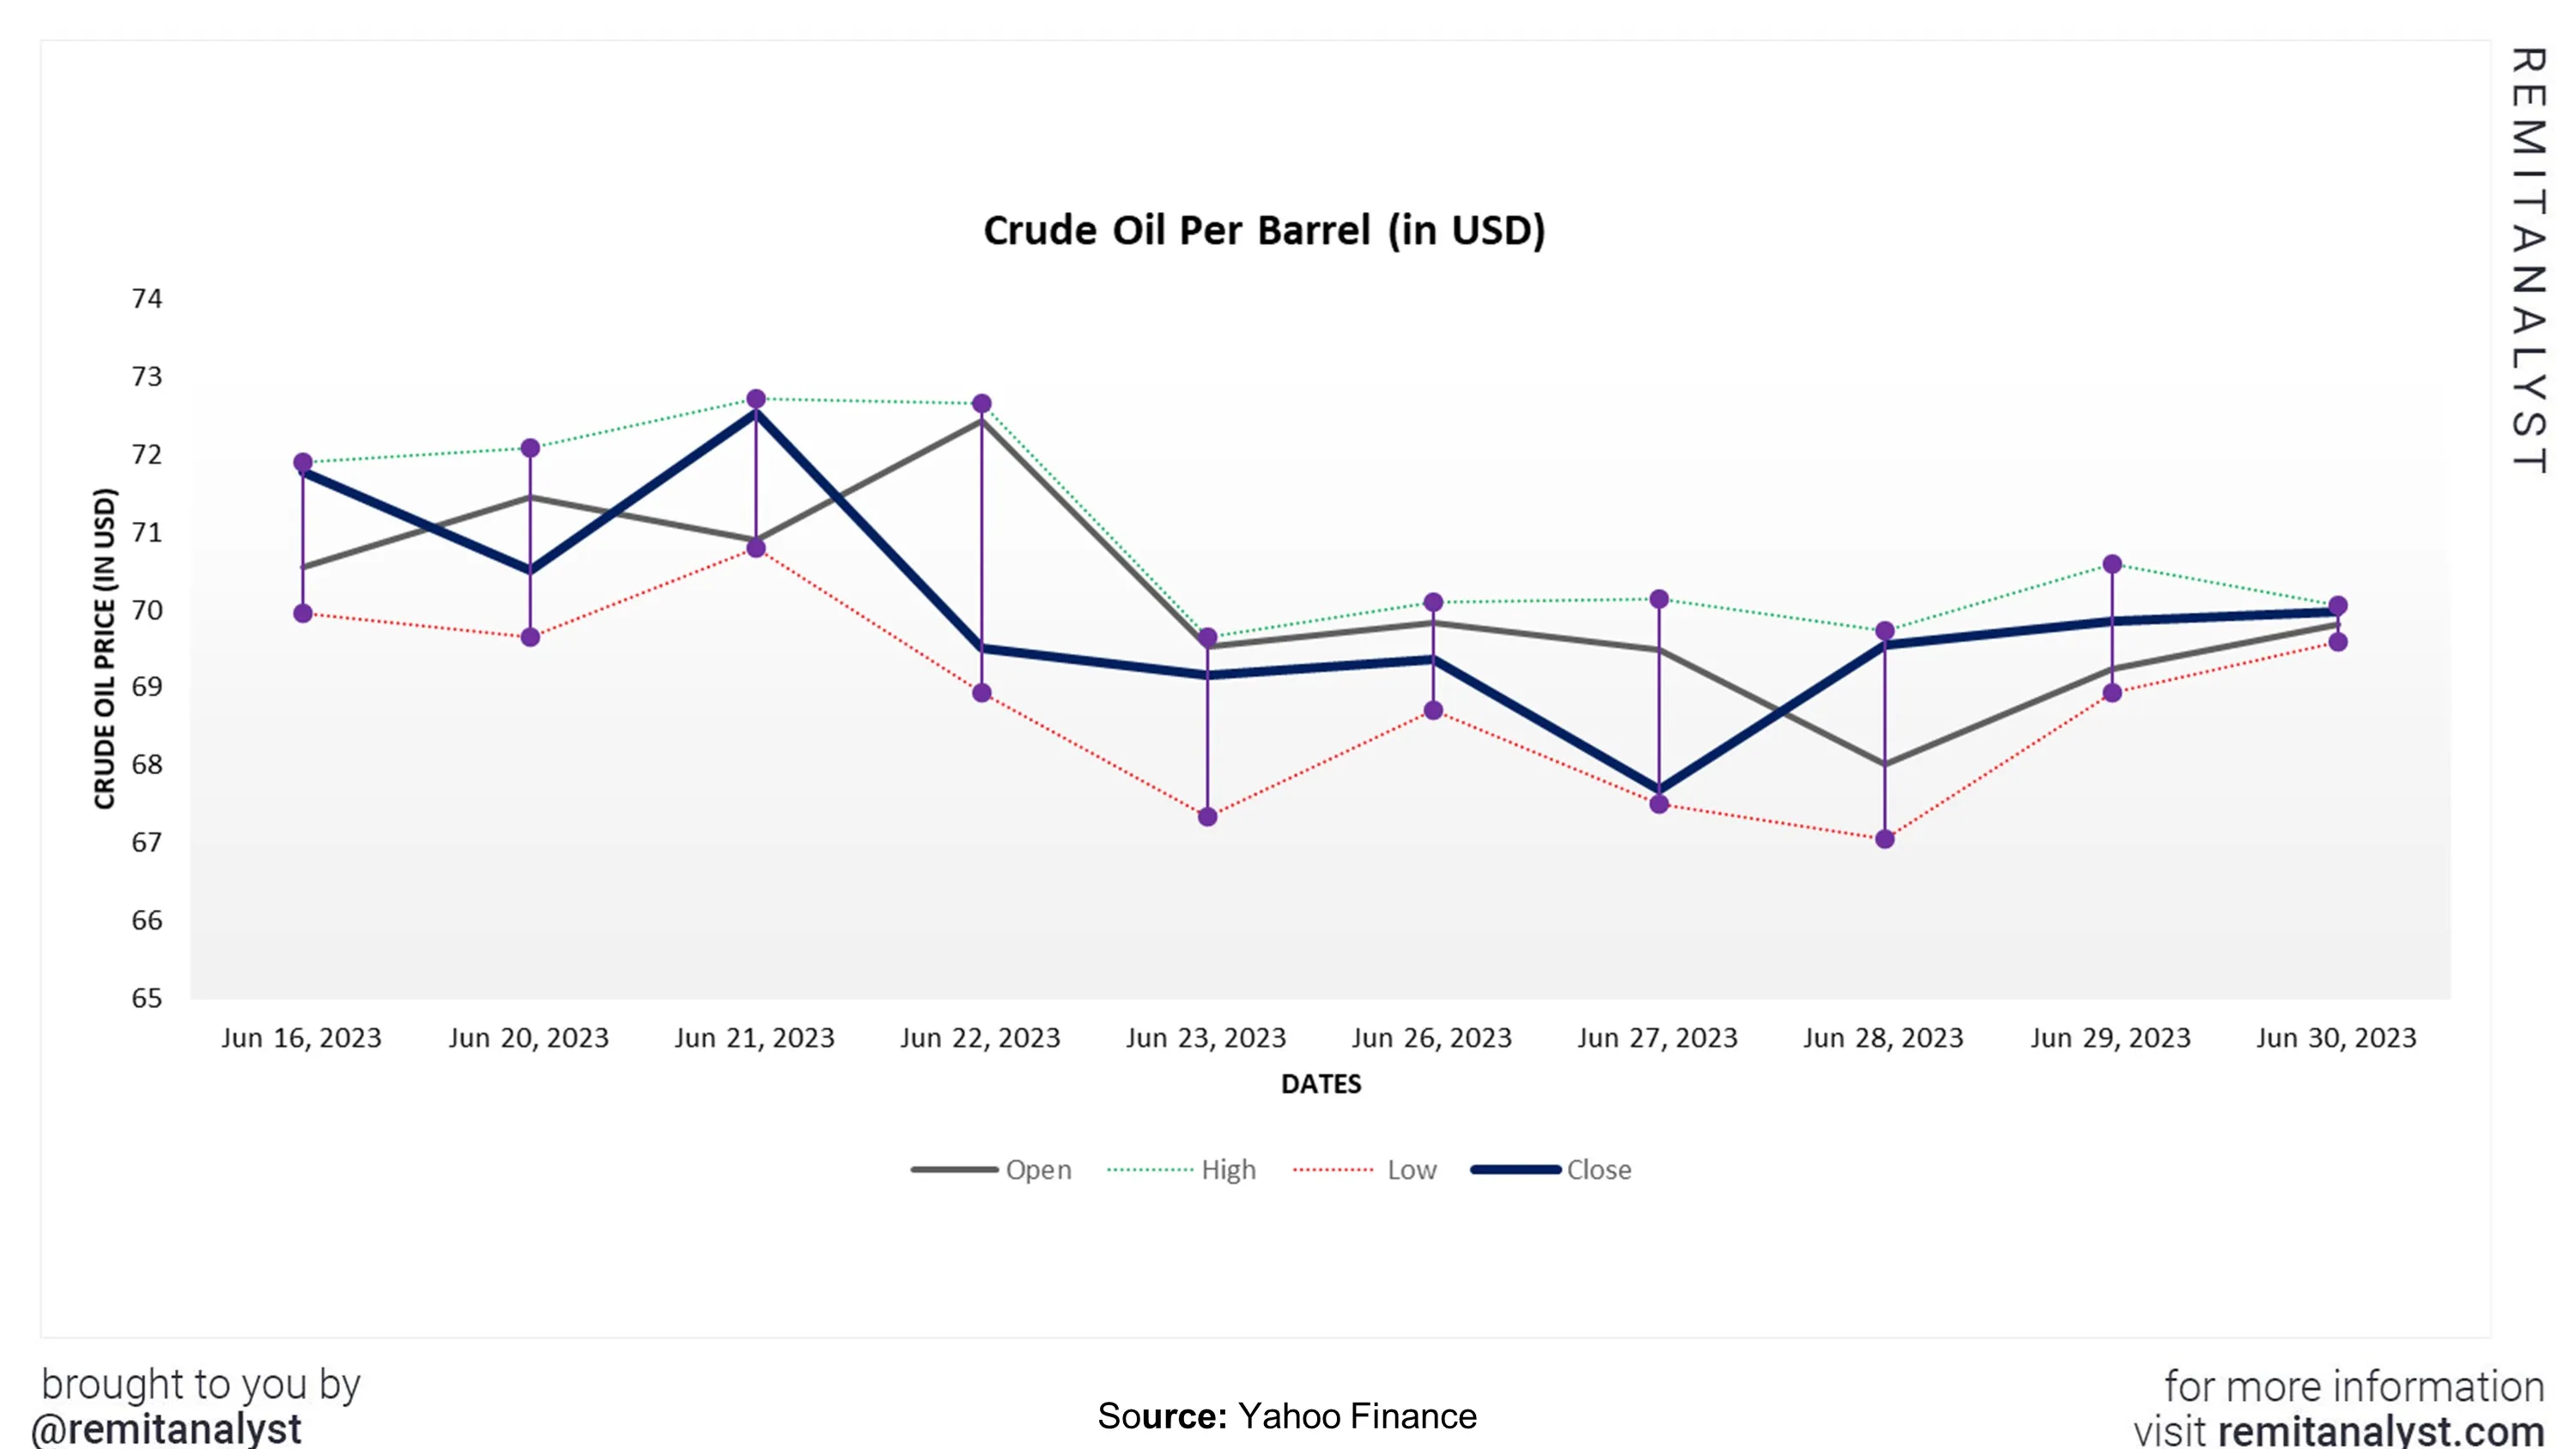 crude-oil-prices-from-16-june-2023-to-30-june-2023